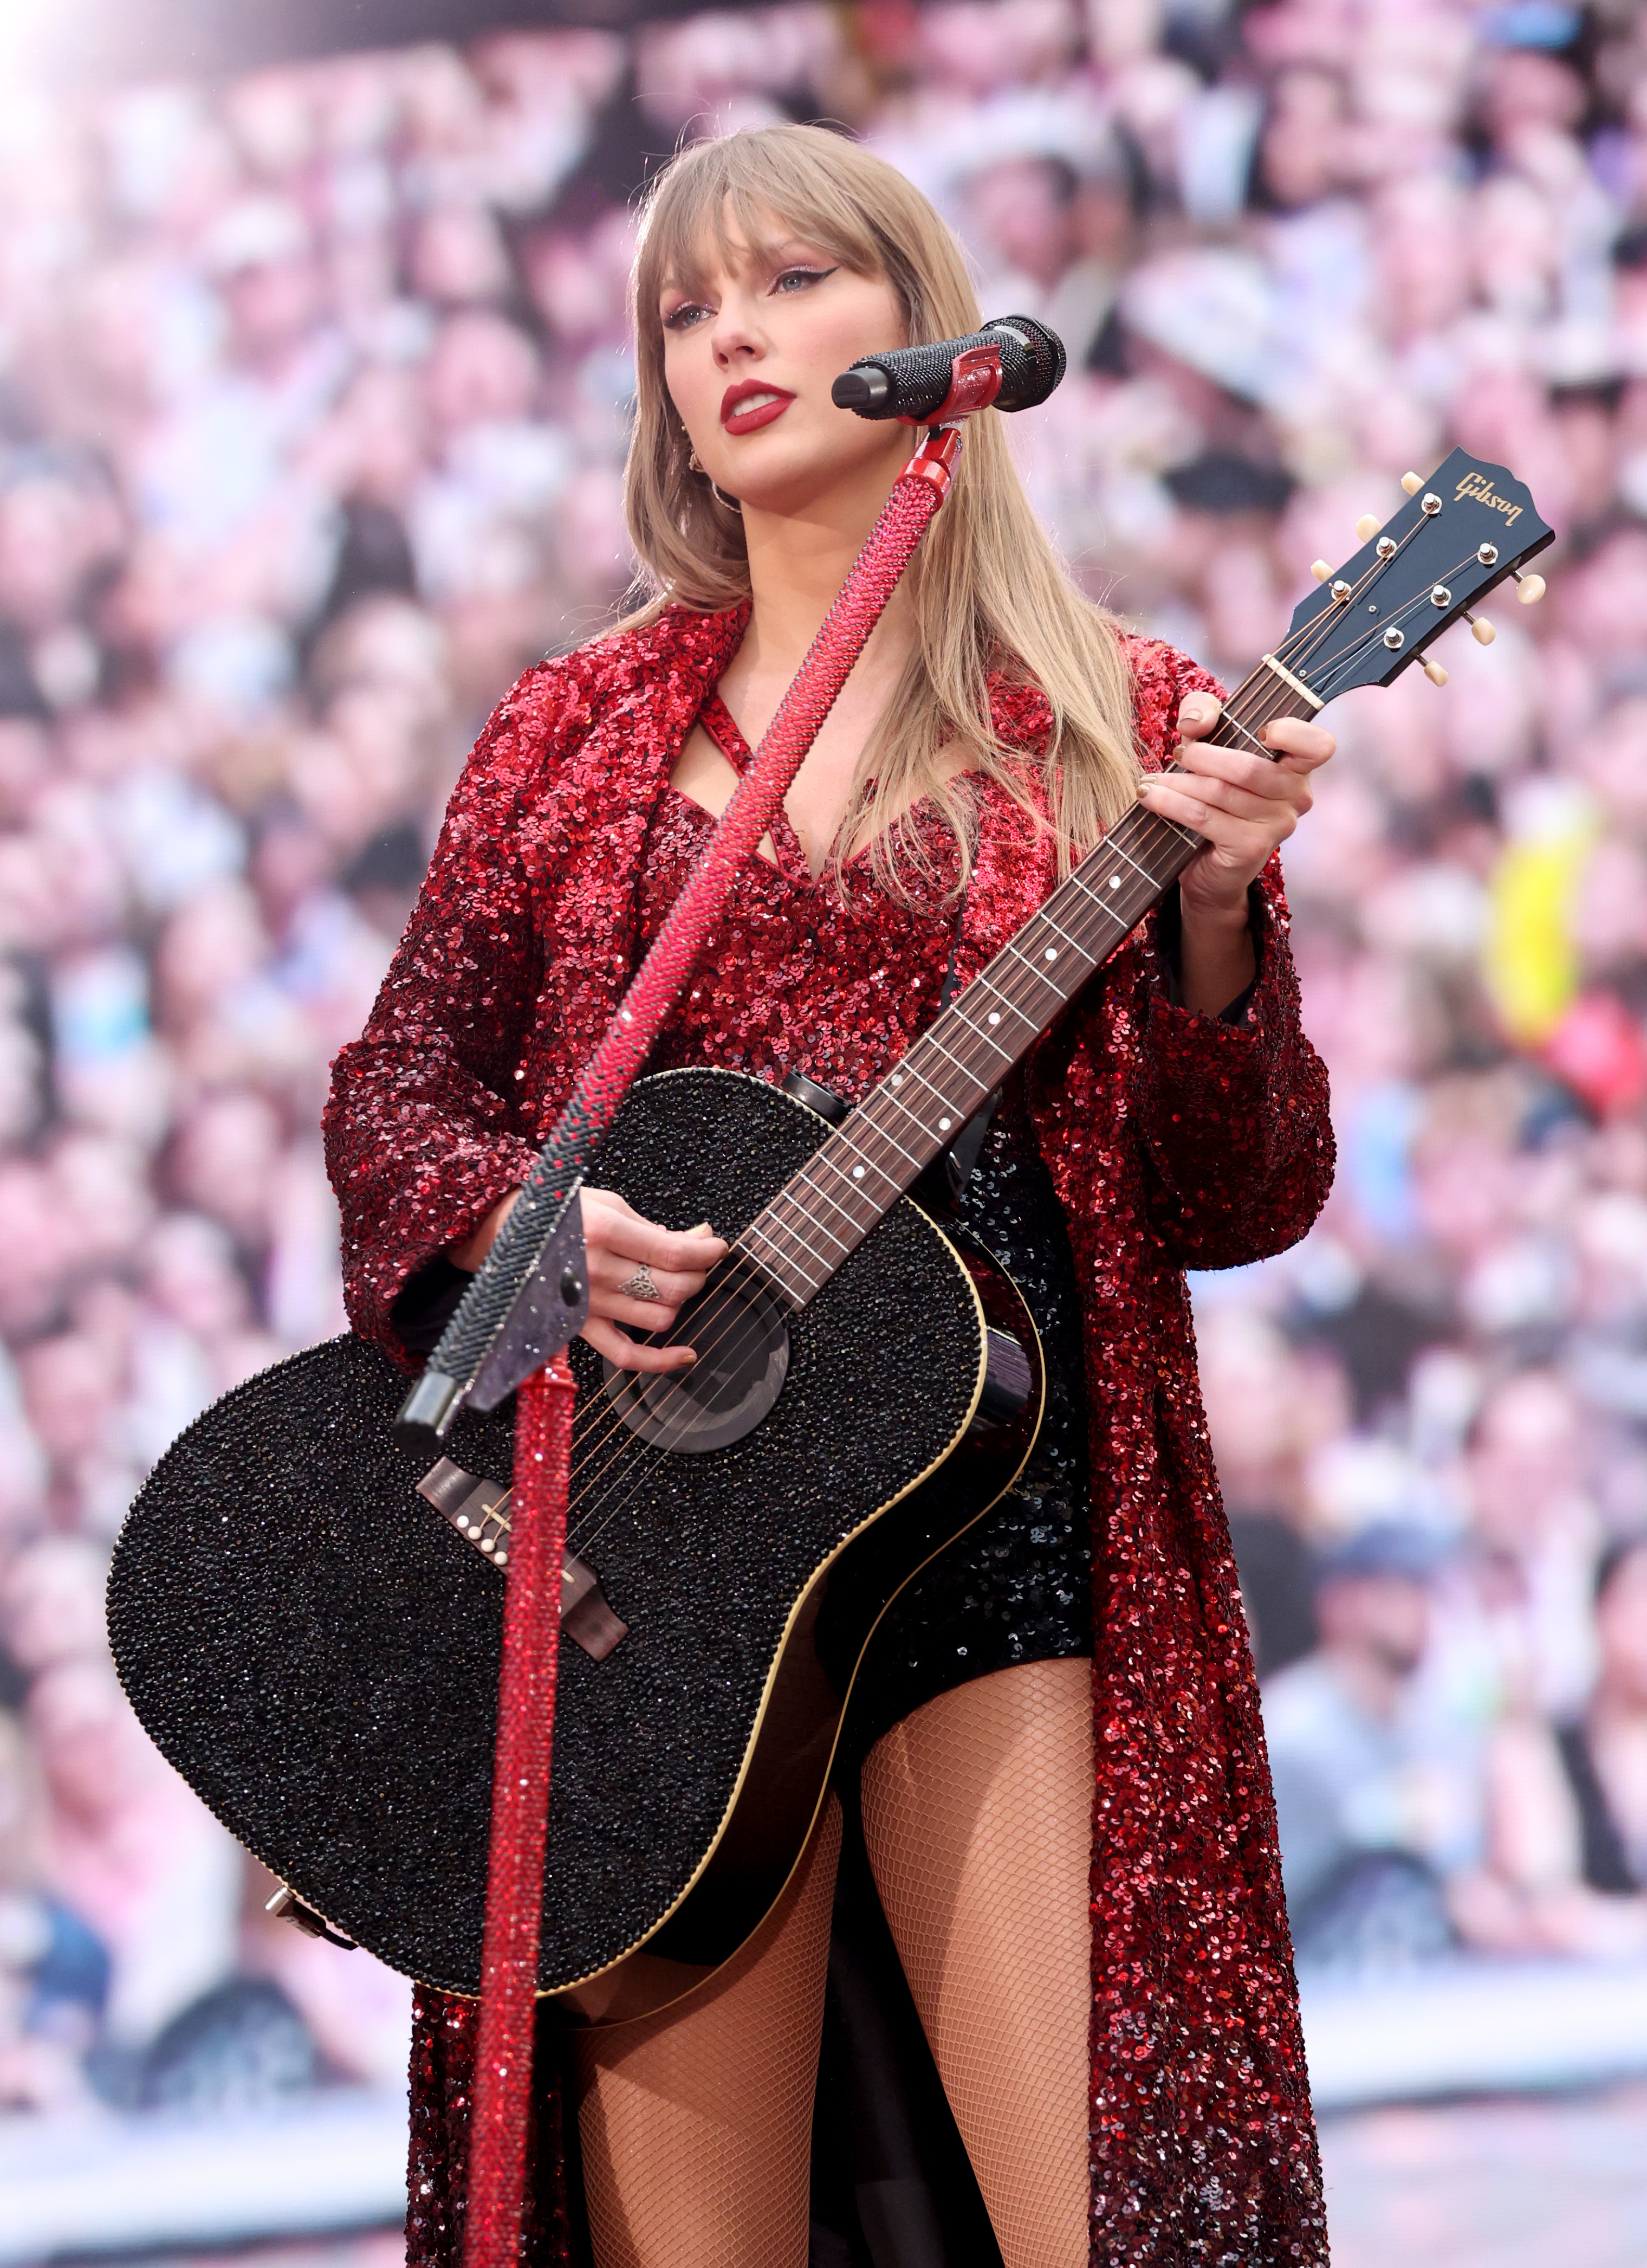 Taylor Swift performs on stage with a black guitar, wearing a glittery red jacket over a black outfit. The crowd is visible in the background